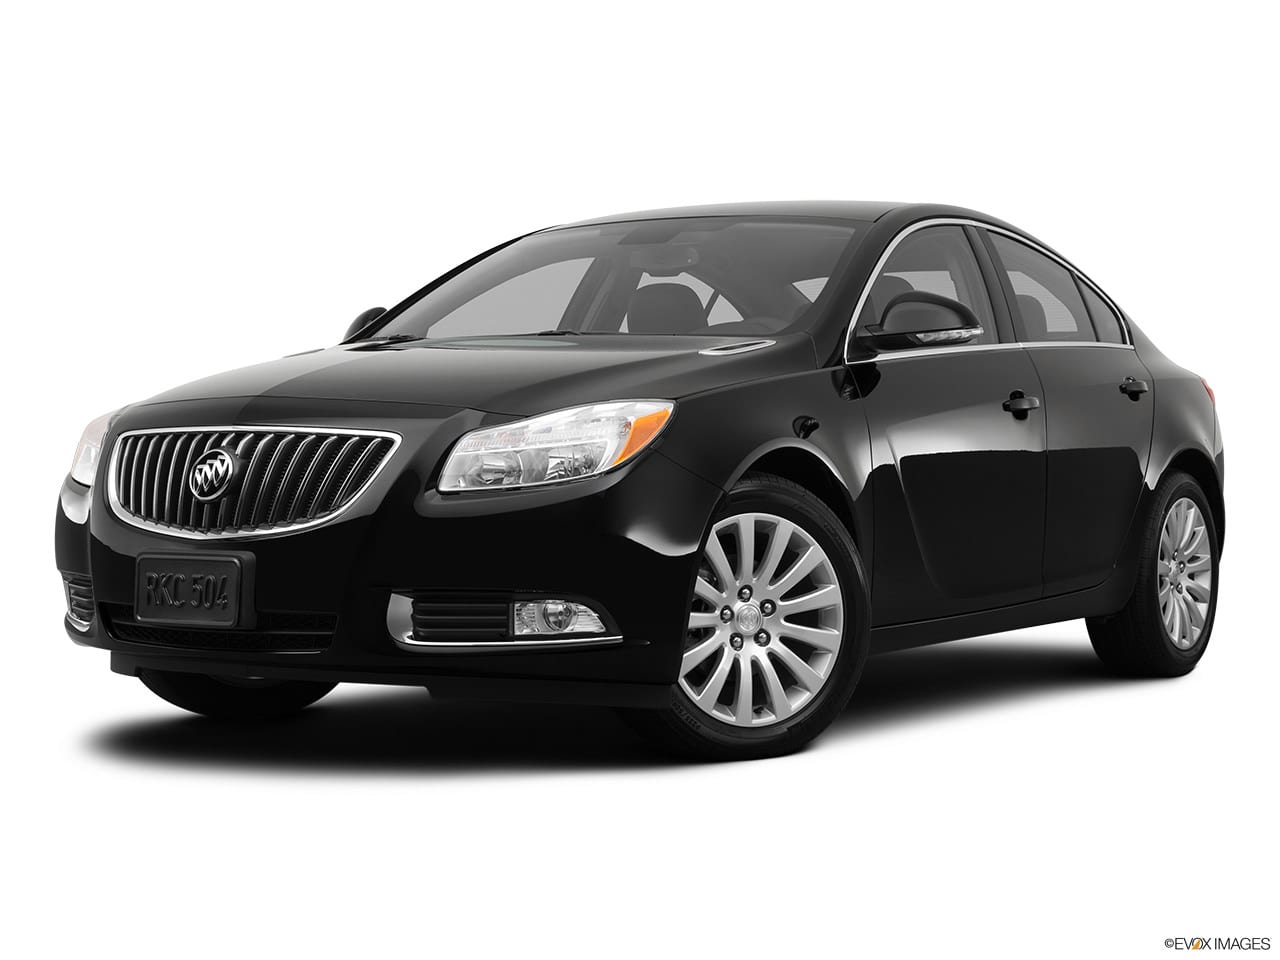 A Buyer's Guide to the 2012 Buick Regal